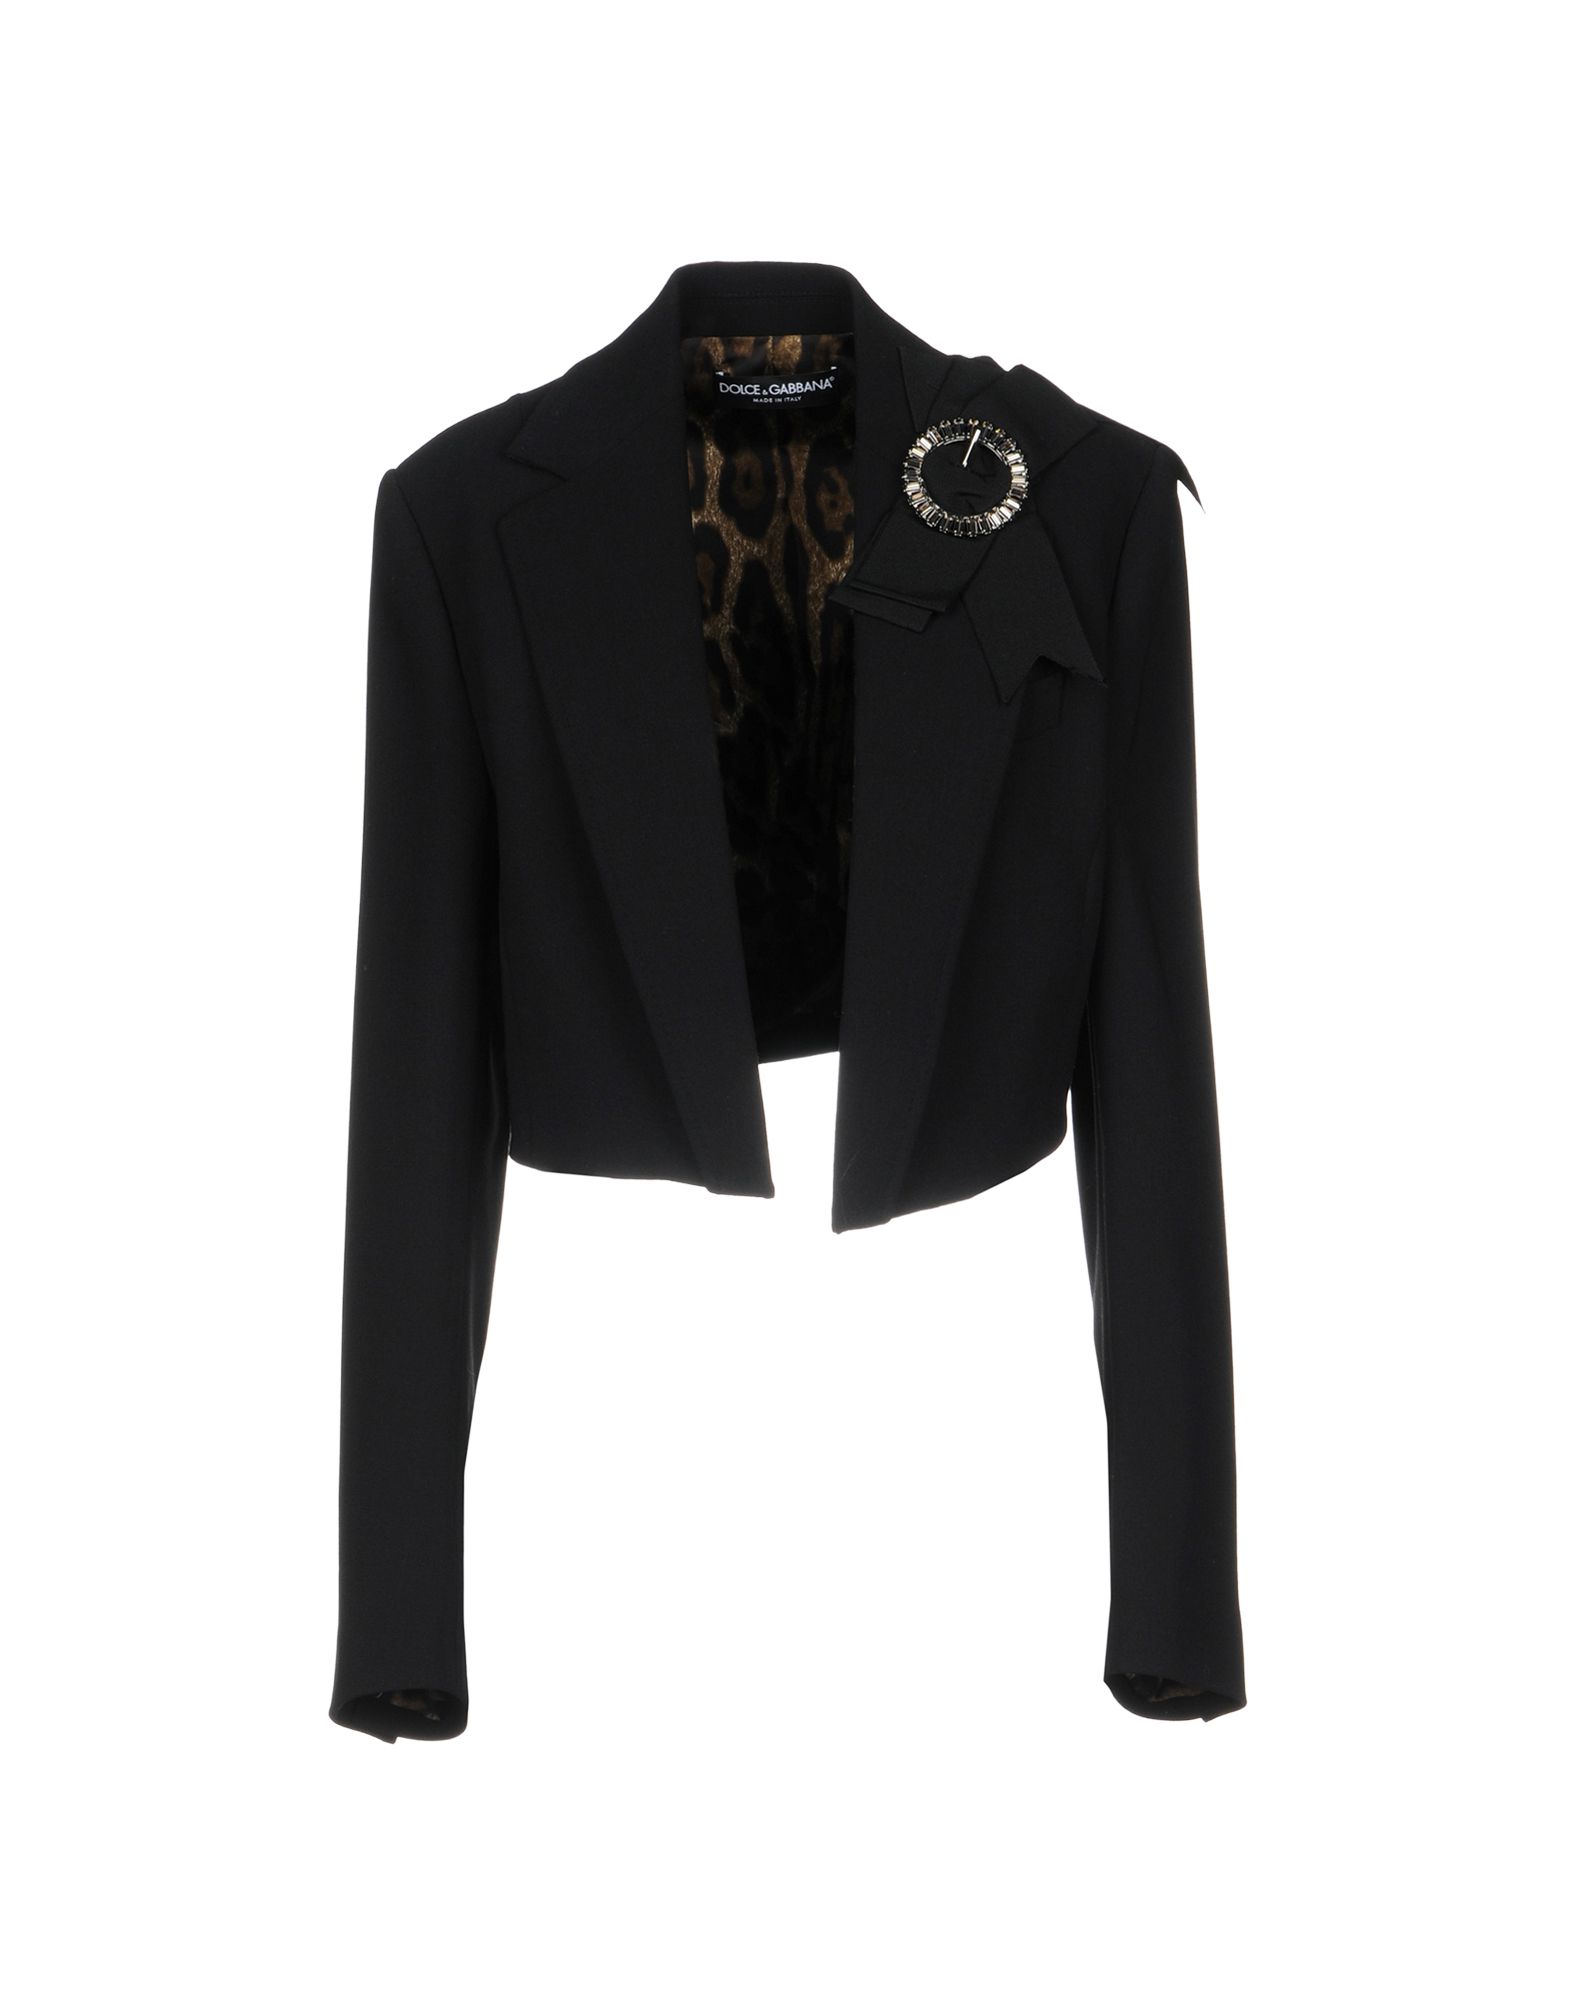 DOLCE & GABBANA SUIT JACKETS,49370681TO 2